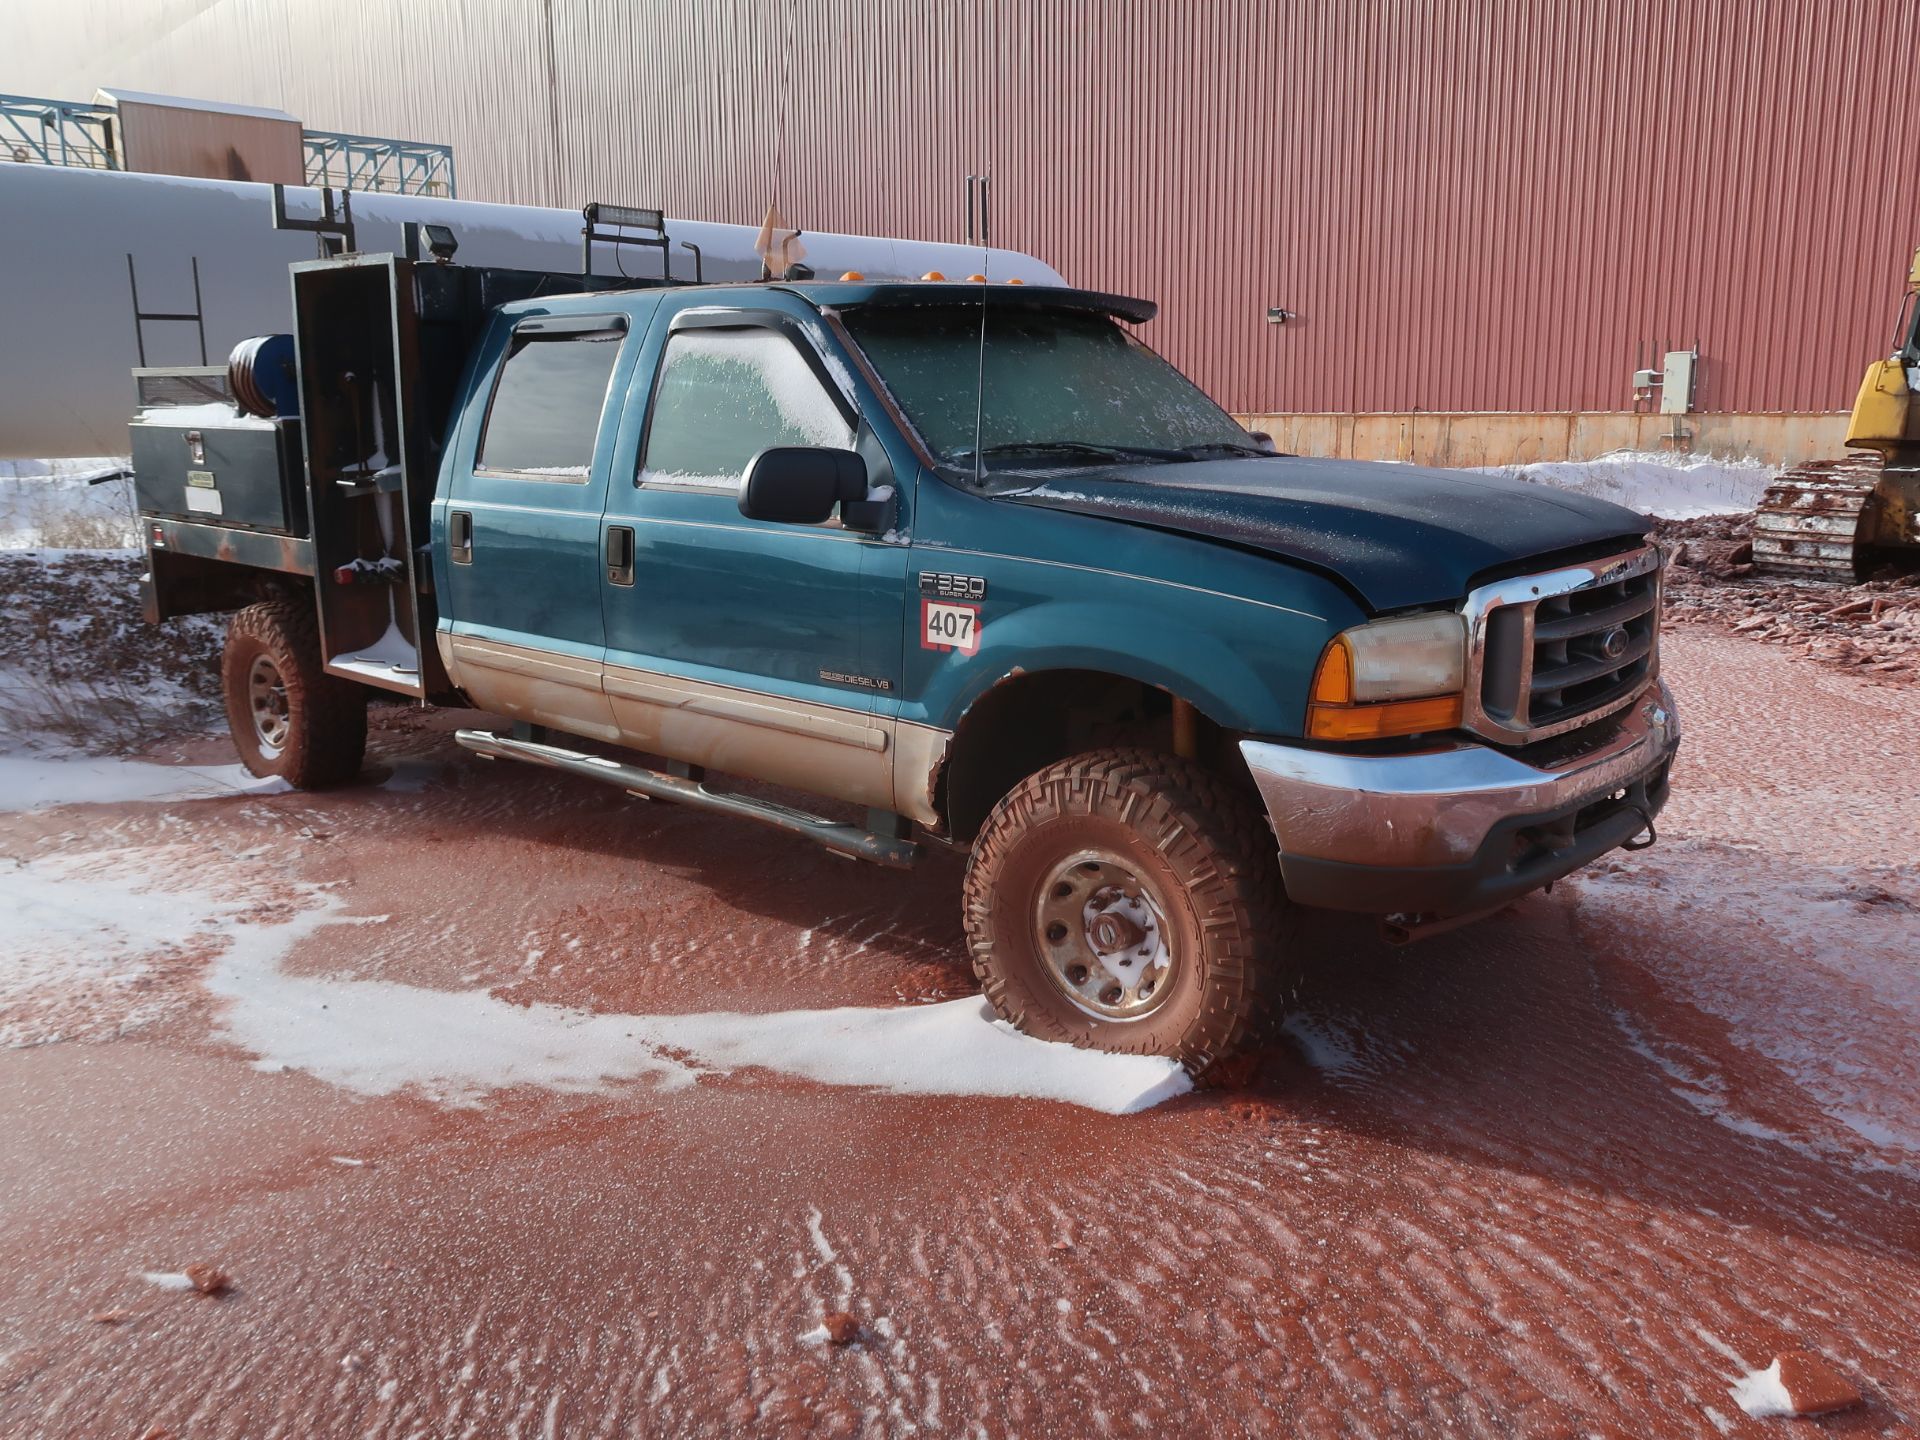 2001 Ford 4x4 flatbed truck, model F350 - Image 2 of 2